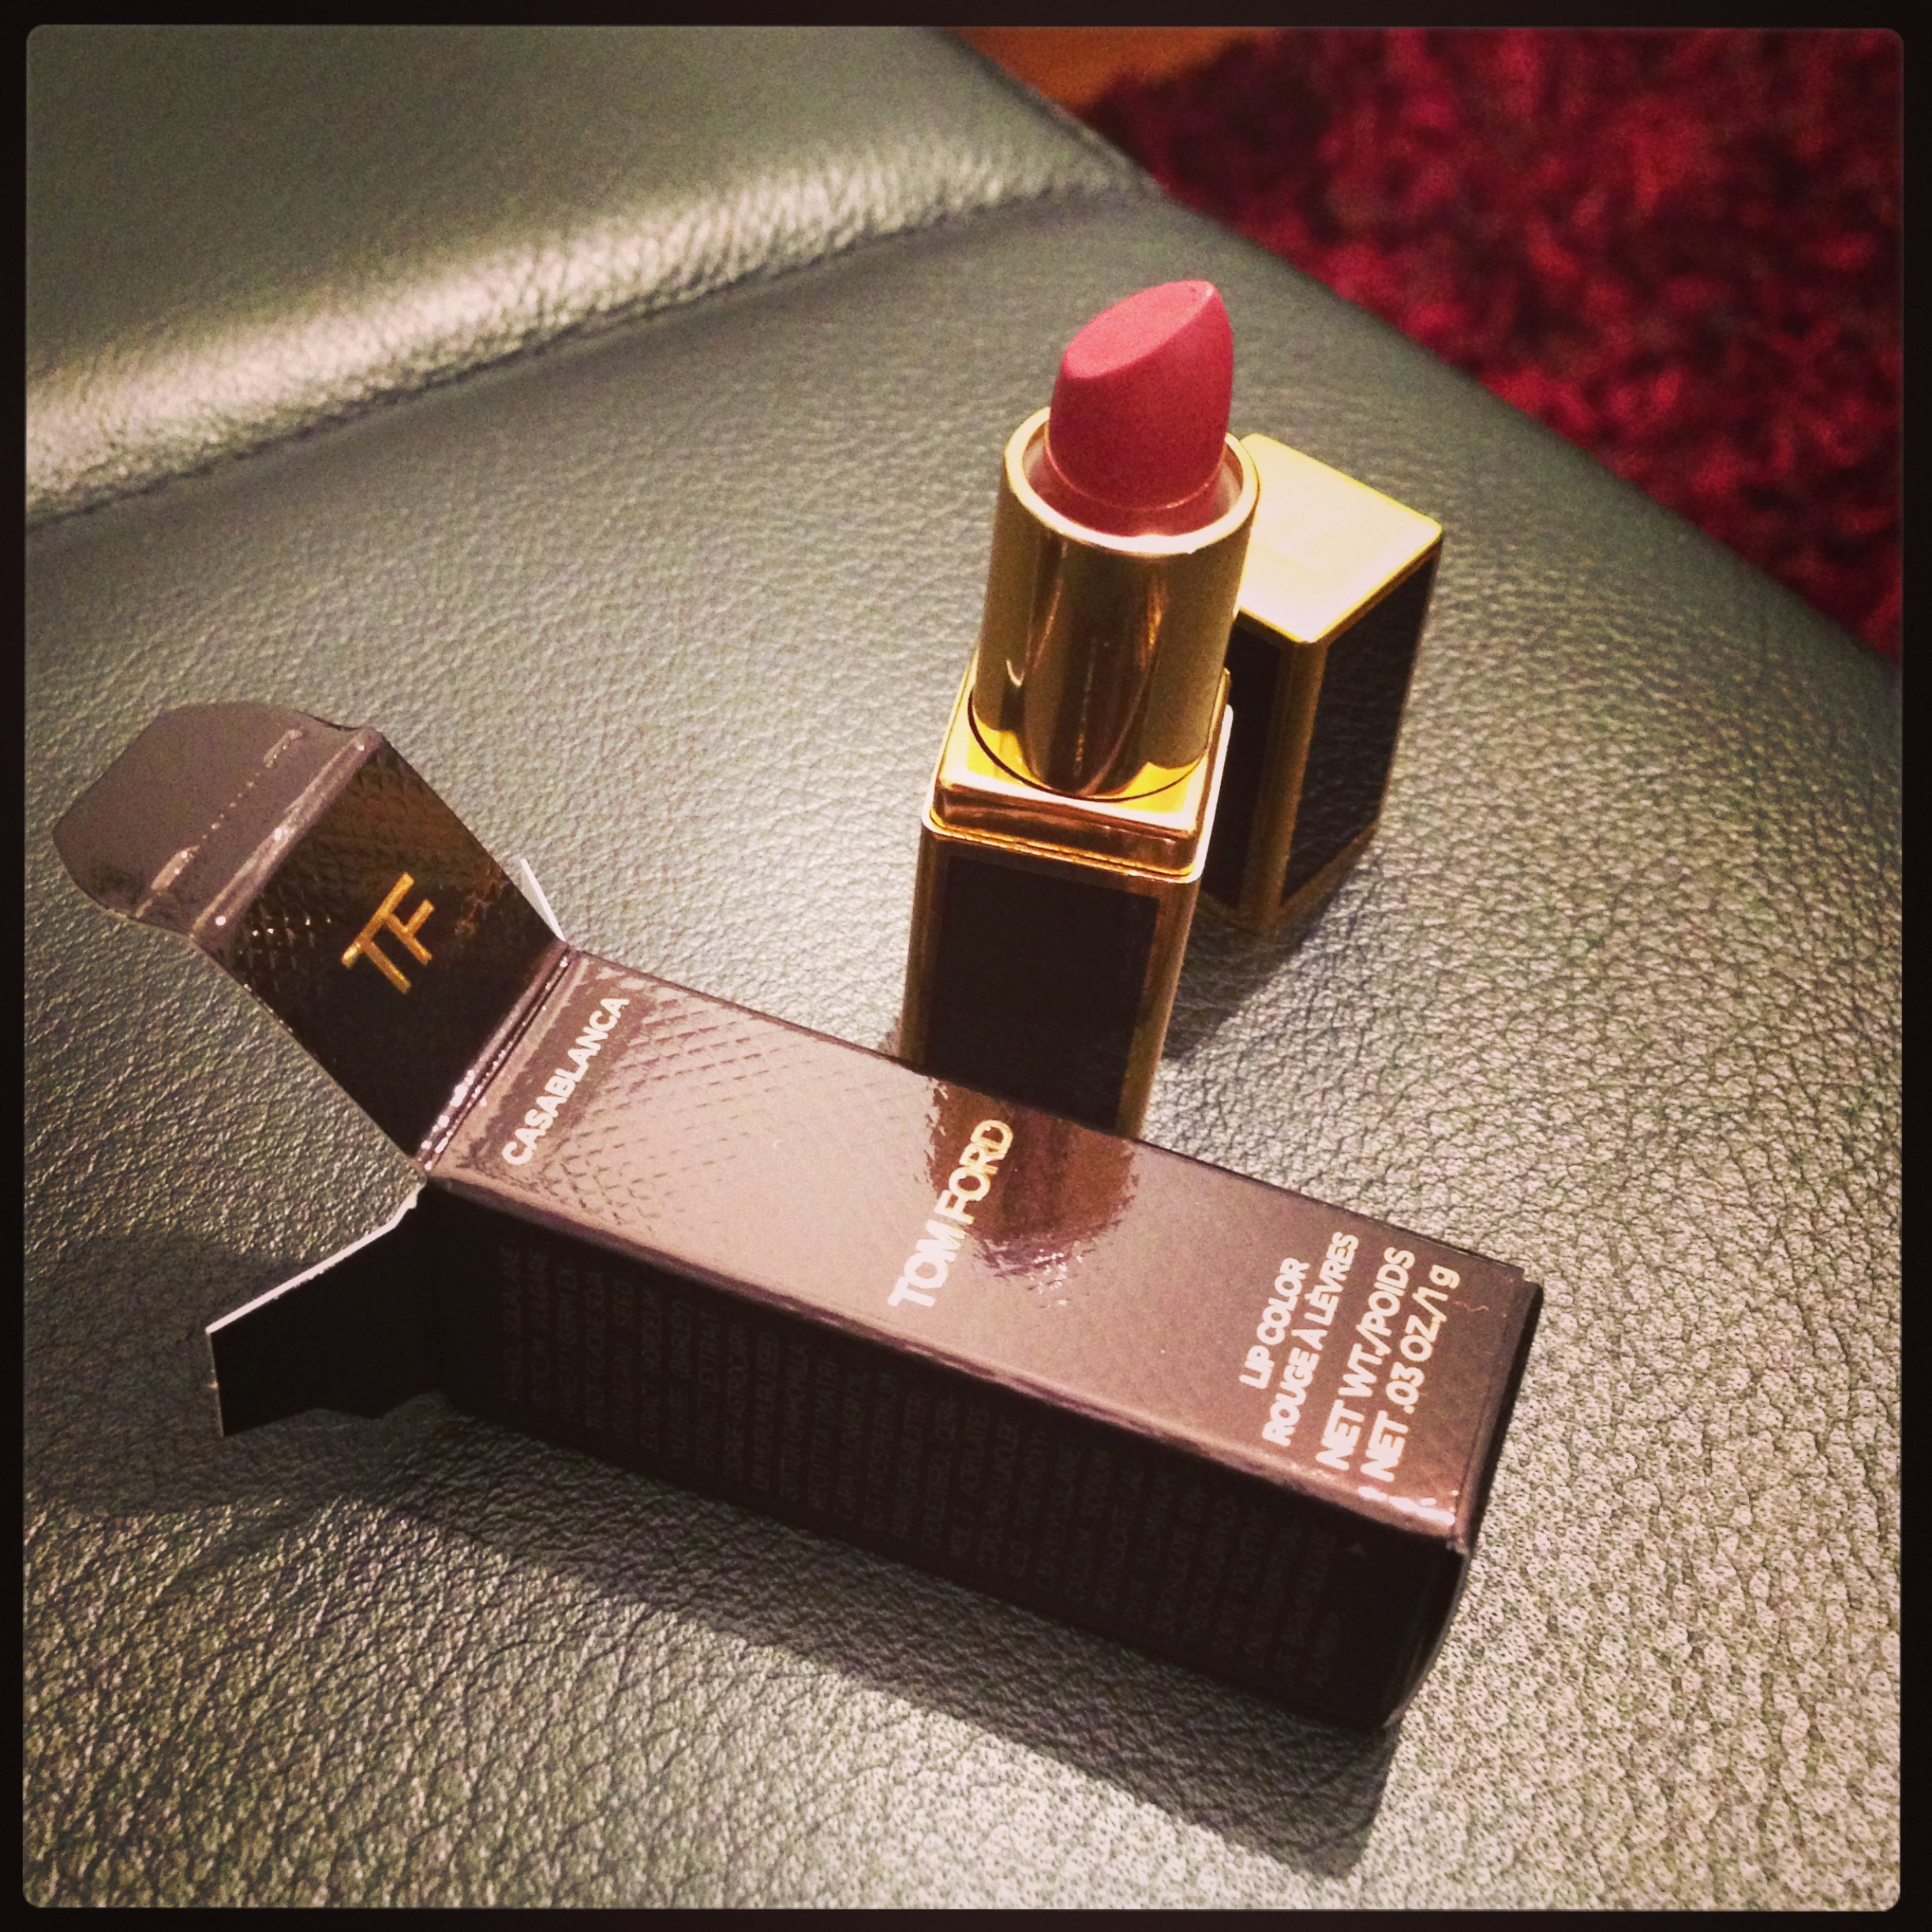 tom ford new lipstick!must have for spring\summer!